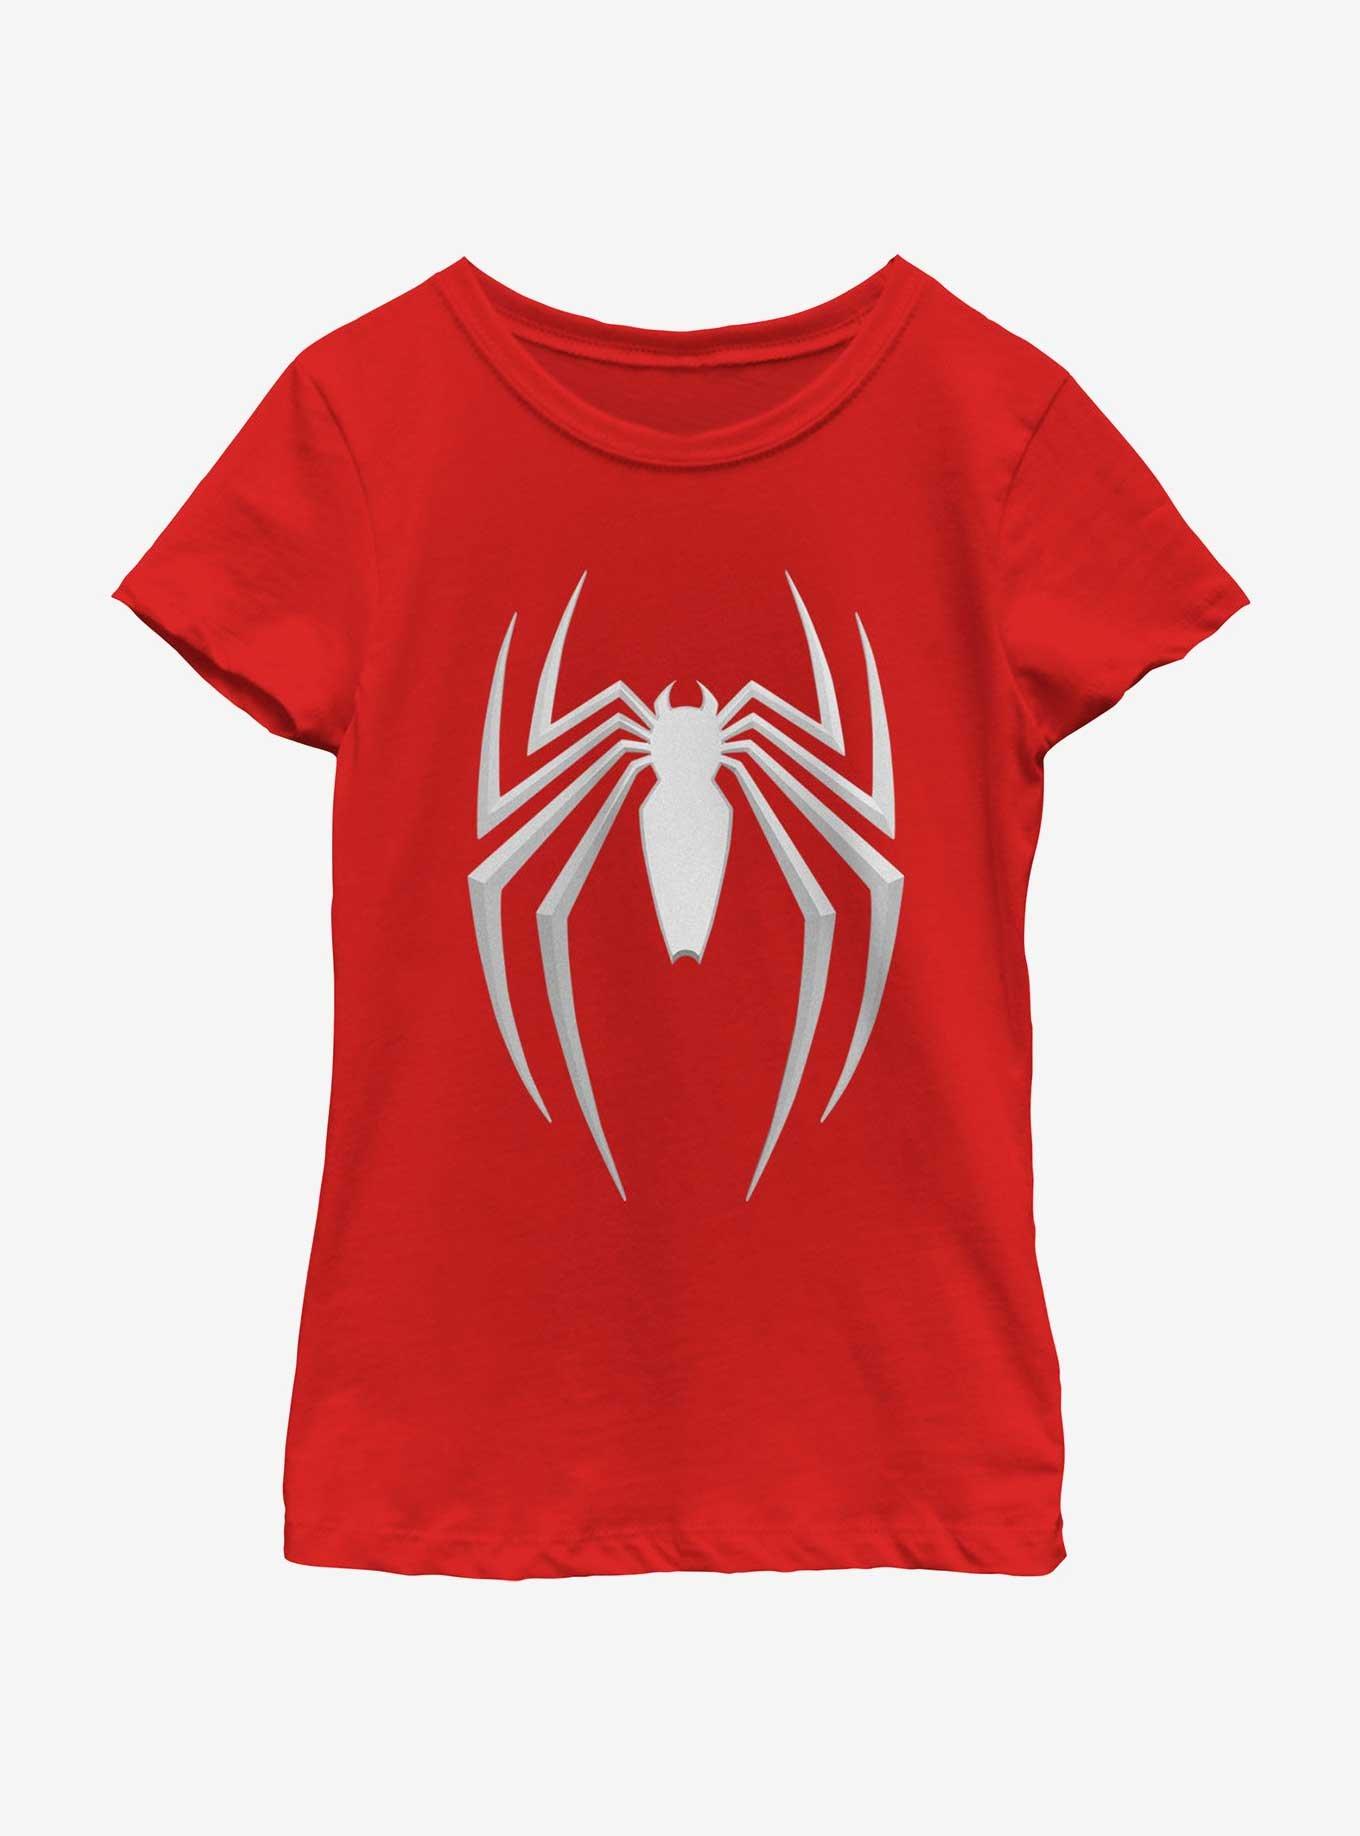 Marvel Spider-Man 2 Game Gray Spider Icon Youth Girls T-Shirt, RED, hi-res